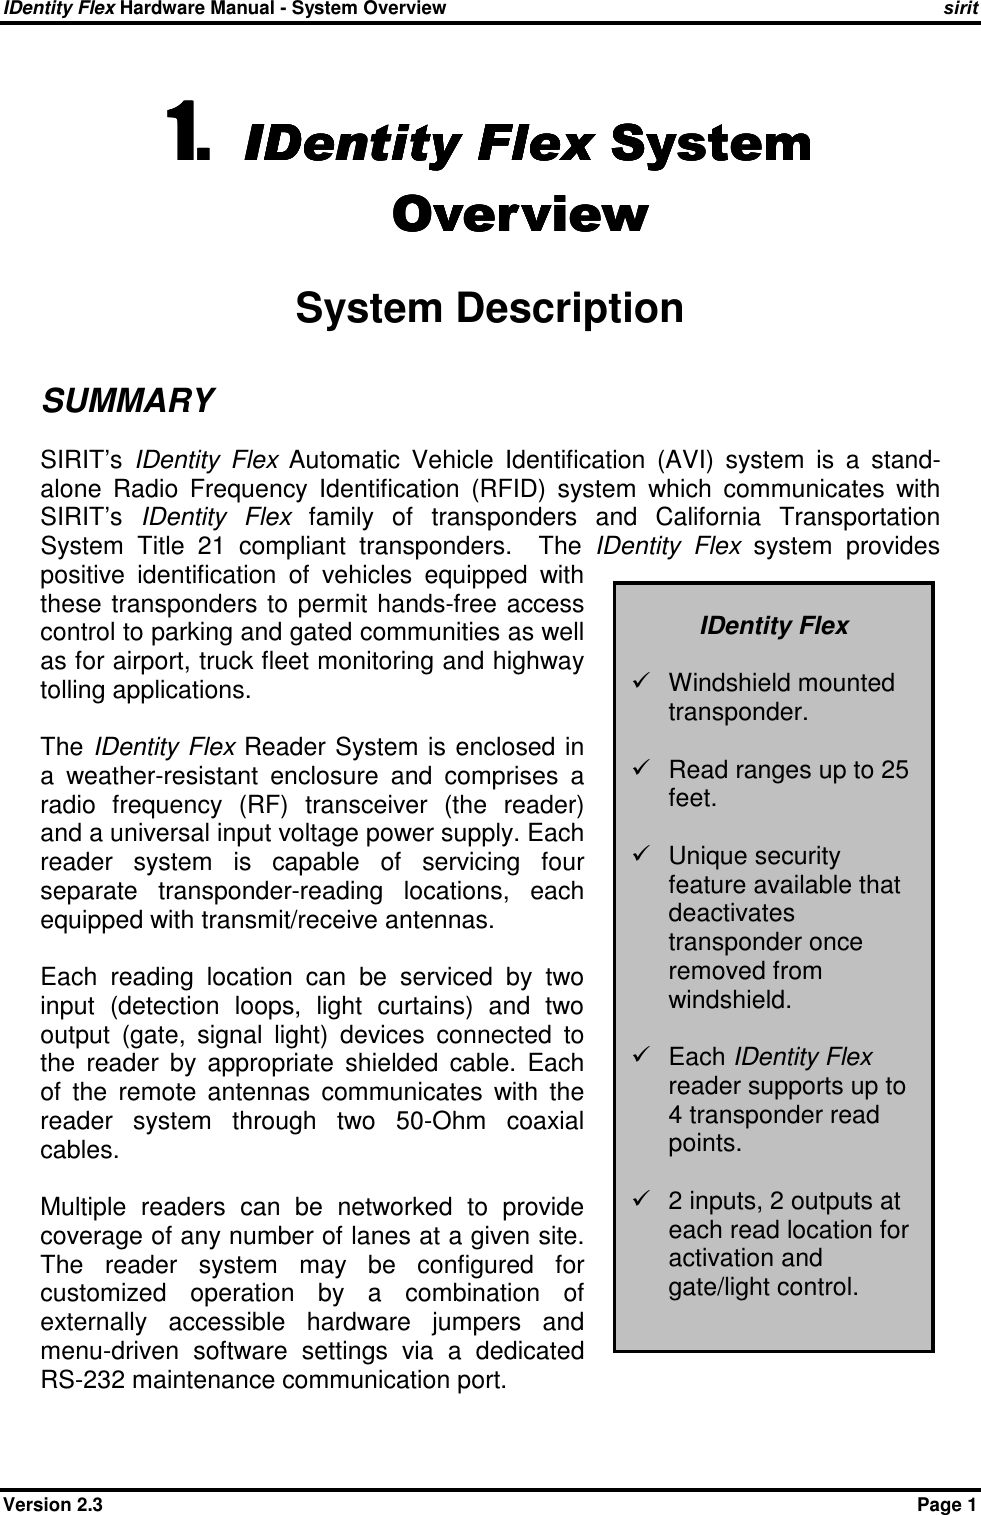 IDentity Flex Hardware Manual - System Overview    sirit Version 2.3    Page 1 1.1.1.1. IDentity FlexIDentity FlexIDentity FlexIDentity Flex System System System System    OverviewOverviewOverviewOverview    System Description SUMMARY SIRIT’s  IDentity  Flex  Automatic  Vehicle  Identification  (AVI)  system  is  a  stand-alone  Radio  Frequency  Identification  (RFID)  system  which  communicates  with SIRIT’s  IDentity  Flex  family  of  transponders  and  California  Transportation System  Title  21  compliant  transponders.    The  IDentity  Flex  system  provides positive  identification  of  vehicles  equipped  with these  transponders  to permit  hands-free  access control to parking and gated communities as well as for airport, truck fleet monitoring and highway tolling applications.  The IDentity  Flex Reader System is enclosed in a  weather-resistant  enclosure  and  comprises  a radio  frequency  (RF)  transceiver  (the  reader) and a universal input voltage power supply. Each reader  system  is  capable  of  servicing  four separate  transponder-reading  locations,  each equipped with transmit/receive antennas.  Each  reading  location  can  be  serviced  by  two input  (detection  loops,  light  curtains)  and  two output  (gate,  signal  light)  devices  connected  to the  reader  by  appropriate  shielded  cable.  Each of  the  remote  antennas  communicates  with  the reader  system  through  two  50-Ohm  coaxial cables.  Multiple  readers  can  be  networked  to  provide coverage of any number of lanes at a given site.  The  reader  system  may  be  configured  for customized  operation  by  a  combination  of externally  accessible  hardware  jumpers  and menu-driven  software  settings  via  a  dedicated RS-232 maintenance communication port.   IDentity Flex    Windshield mounted transponder.    Read ranges up to 25 feet.    Unique security feature available that deactivates transponder once removed from windshield.    Each IDentity Flex reader supports up to 4 transponder read points.    2 inputs, 2 outputs at each read location for activation and gate/light control. 